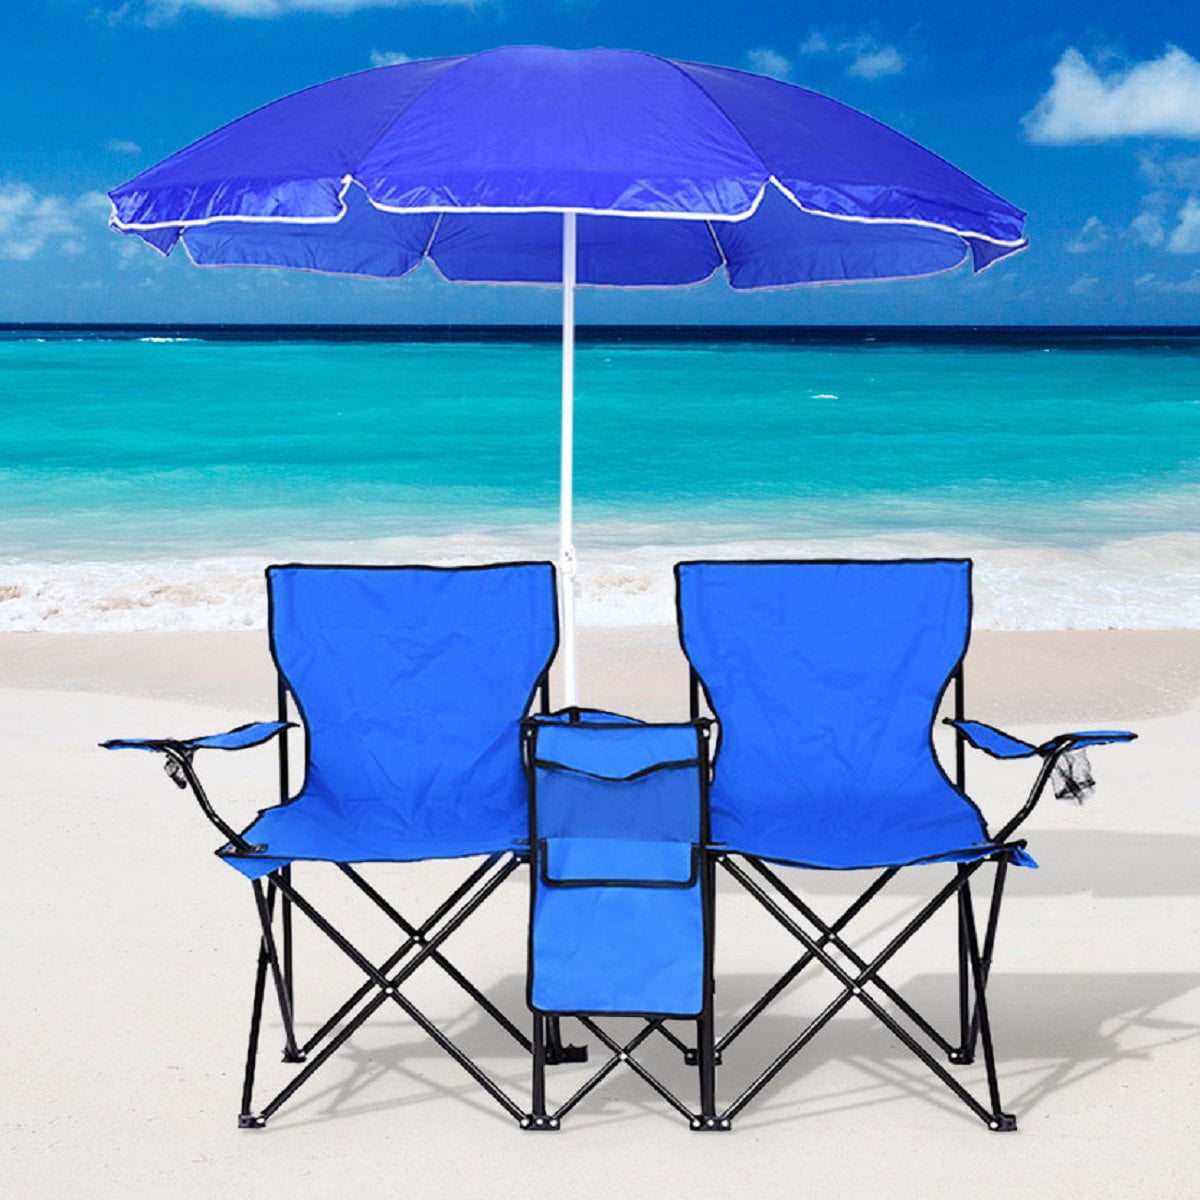 Clearance! Camping Chairs, Folding Chair with Umbrella and